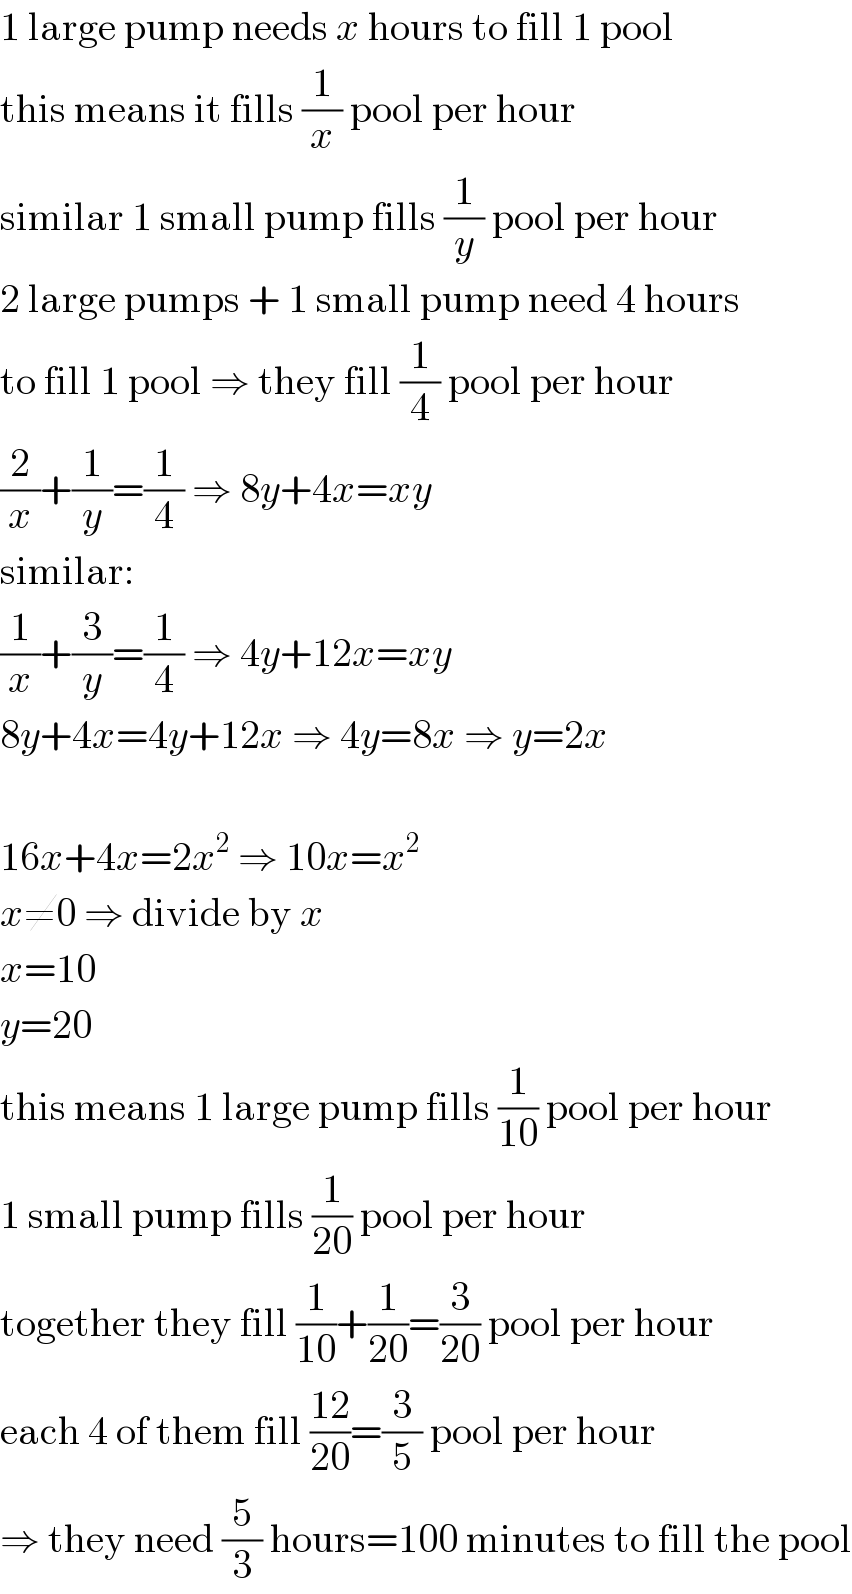 1 large pump needs x hours to fill 1 pool  this means it fills (1/x) pool per hour  similar 1 small pump fills (1/y) pool per hour  2 large pumps + 1 small pump need 4 hours  to fill 1 pool ⇒ they fill (1/4) pool per hour  (2/x)+(1/y)=(1/4) ⇒ 8y+4x=xy  similar:  (1/x)+(3/y)=(1/4) ⇒ 4y+12x=xy  8y+4x=4y+12x ⇒ 4y=8x ⇒ y=2x    16x+4x=2x^2  ⇒ 10x=x^2   x≠0 ⇒ divide by x  x=10  y=20  this means 1 large pump fills (1/(10)) pool per hour  1 small pump fills (1/(20)) pool per hour  together they fill (1/(10))+(1/(20))=(3/(20)) pool per hour  each 4 of them fill ((12)/(20))=(3/5) pool per hour  ⇒ they need (5/3) hours=100 minutes to fill the pool  